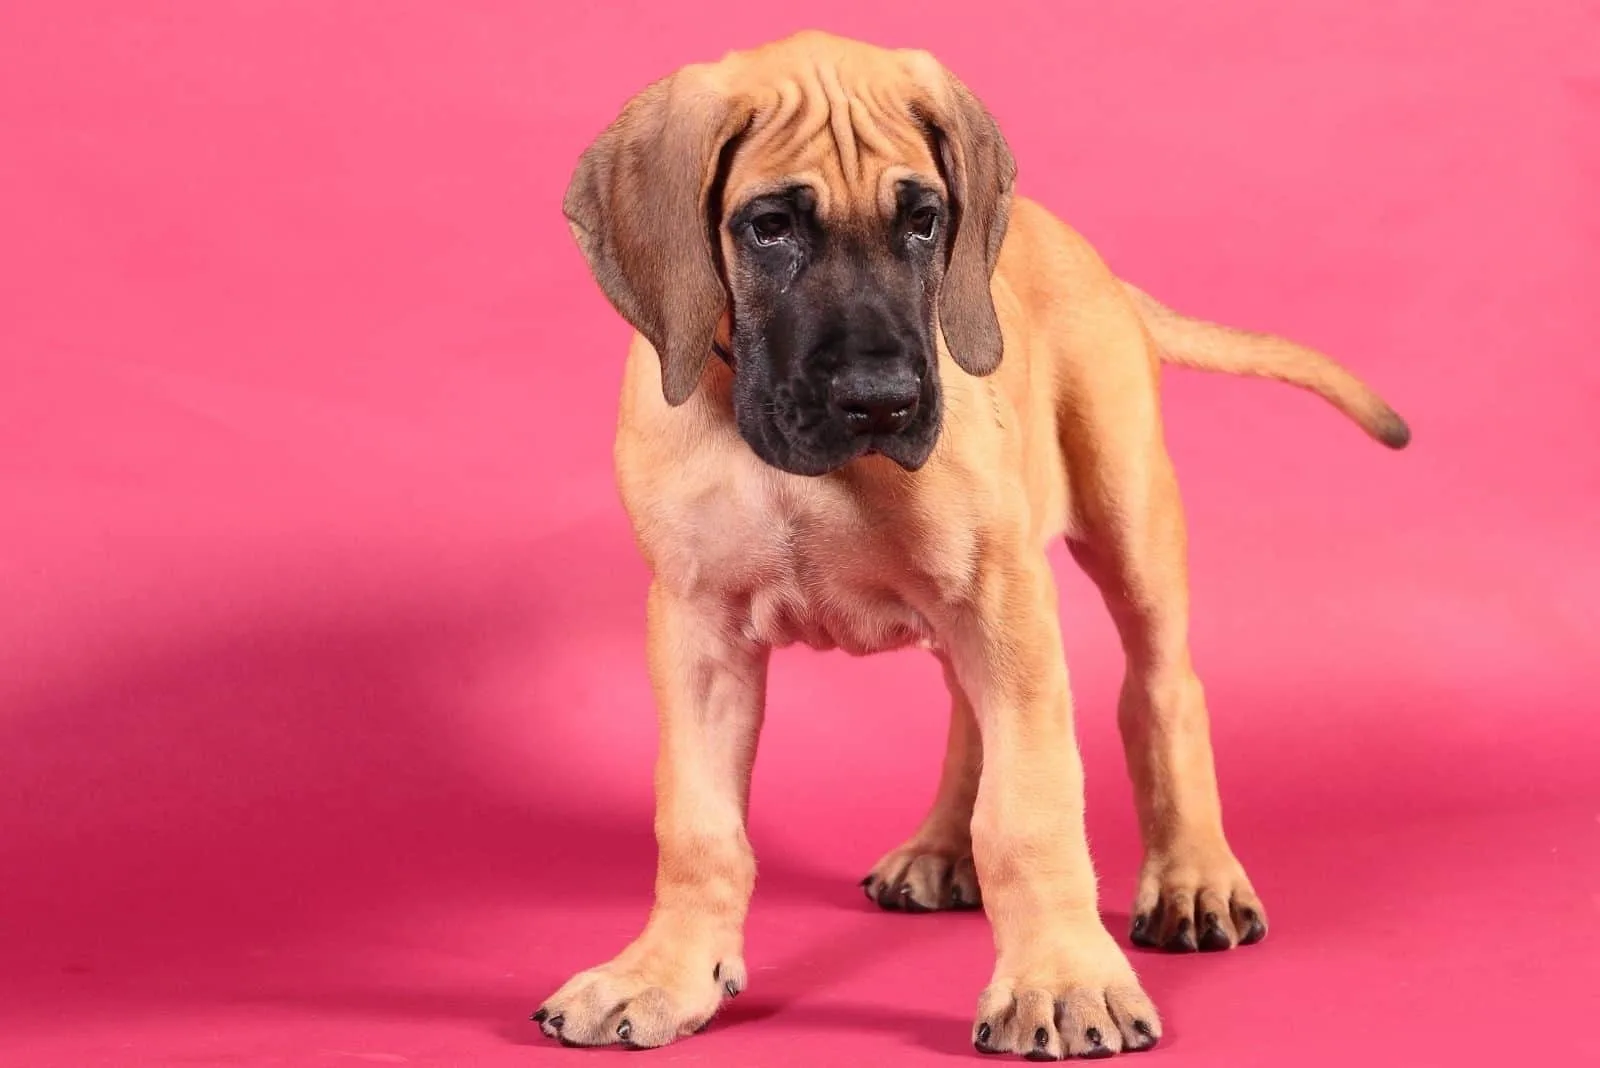 fawn great dane puppy standing in pink room